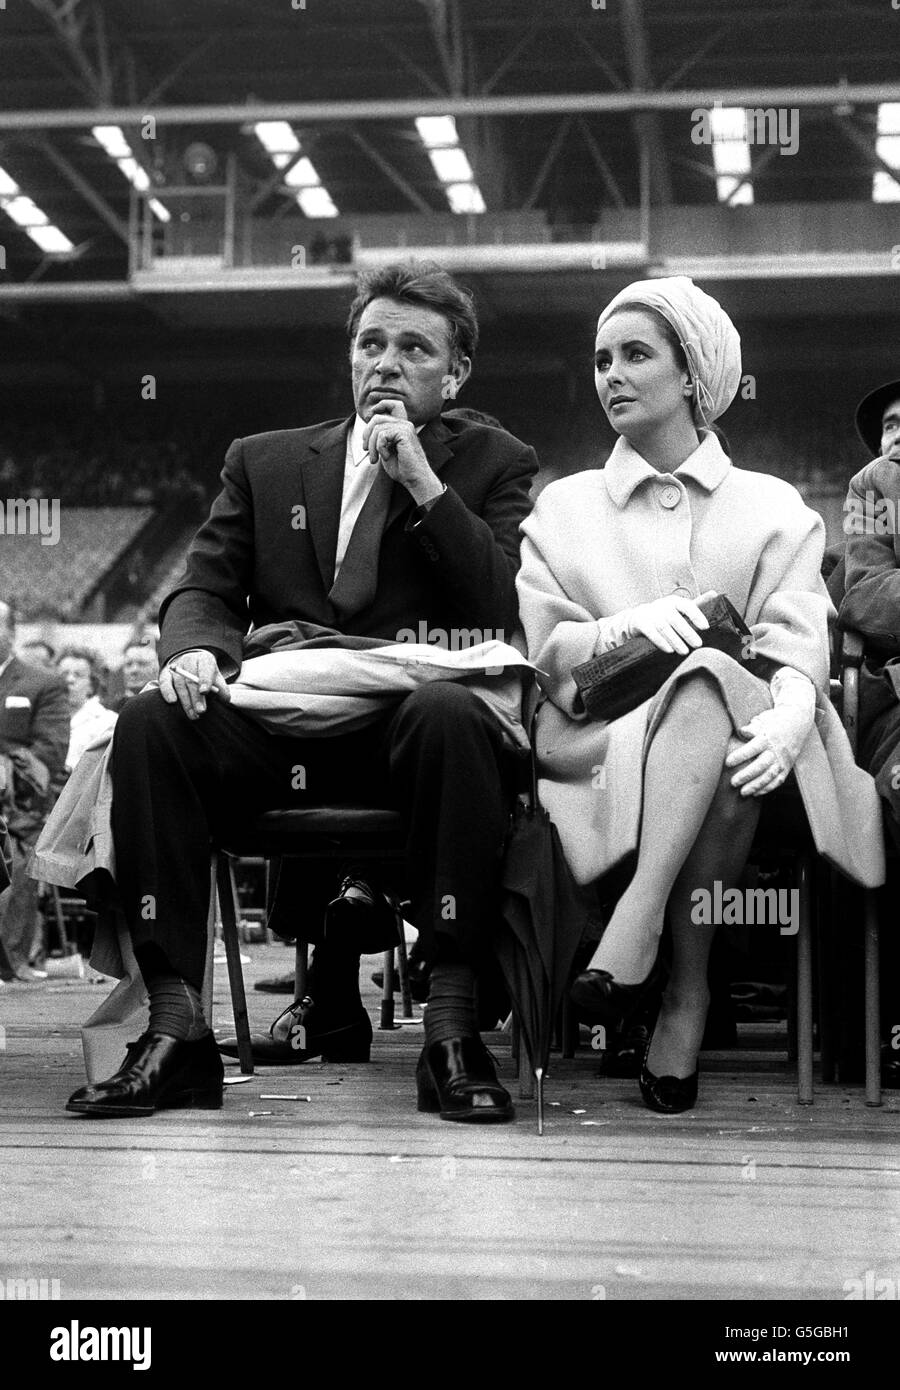 Elizabeth Taylor and Richard Burton stars of the film 'Cleopatra', at the ring side at Wembley, London for the heavy weight match between Henry Cooper and Cassius Clay. Stock Photo